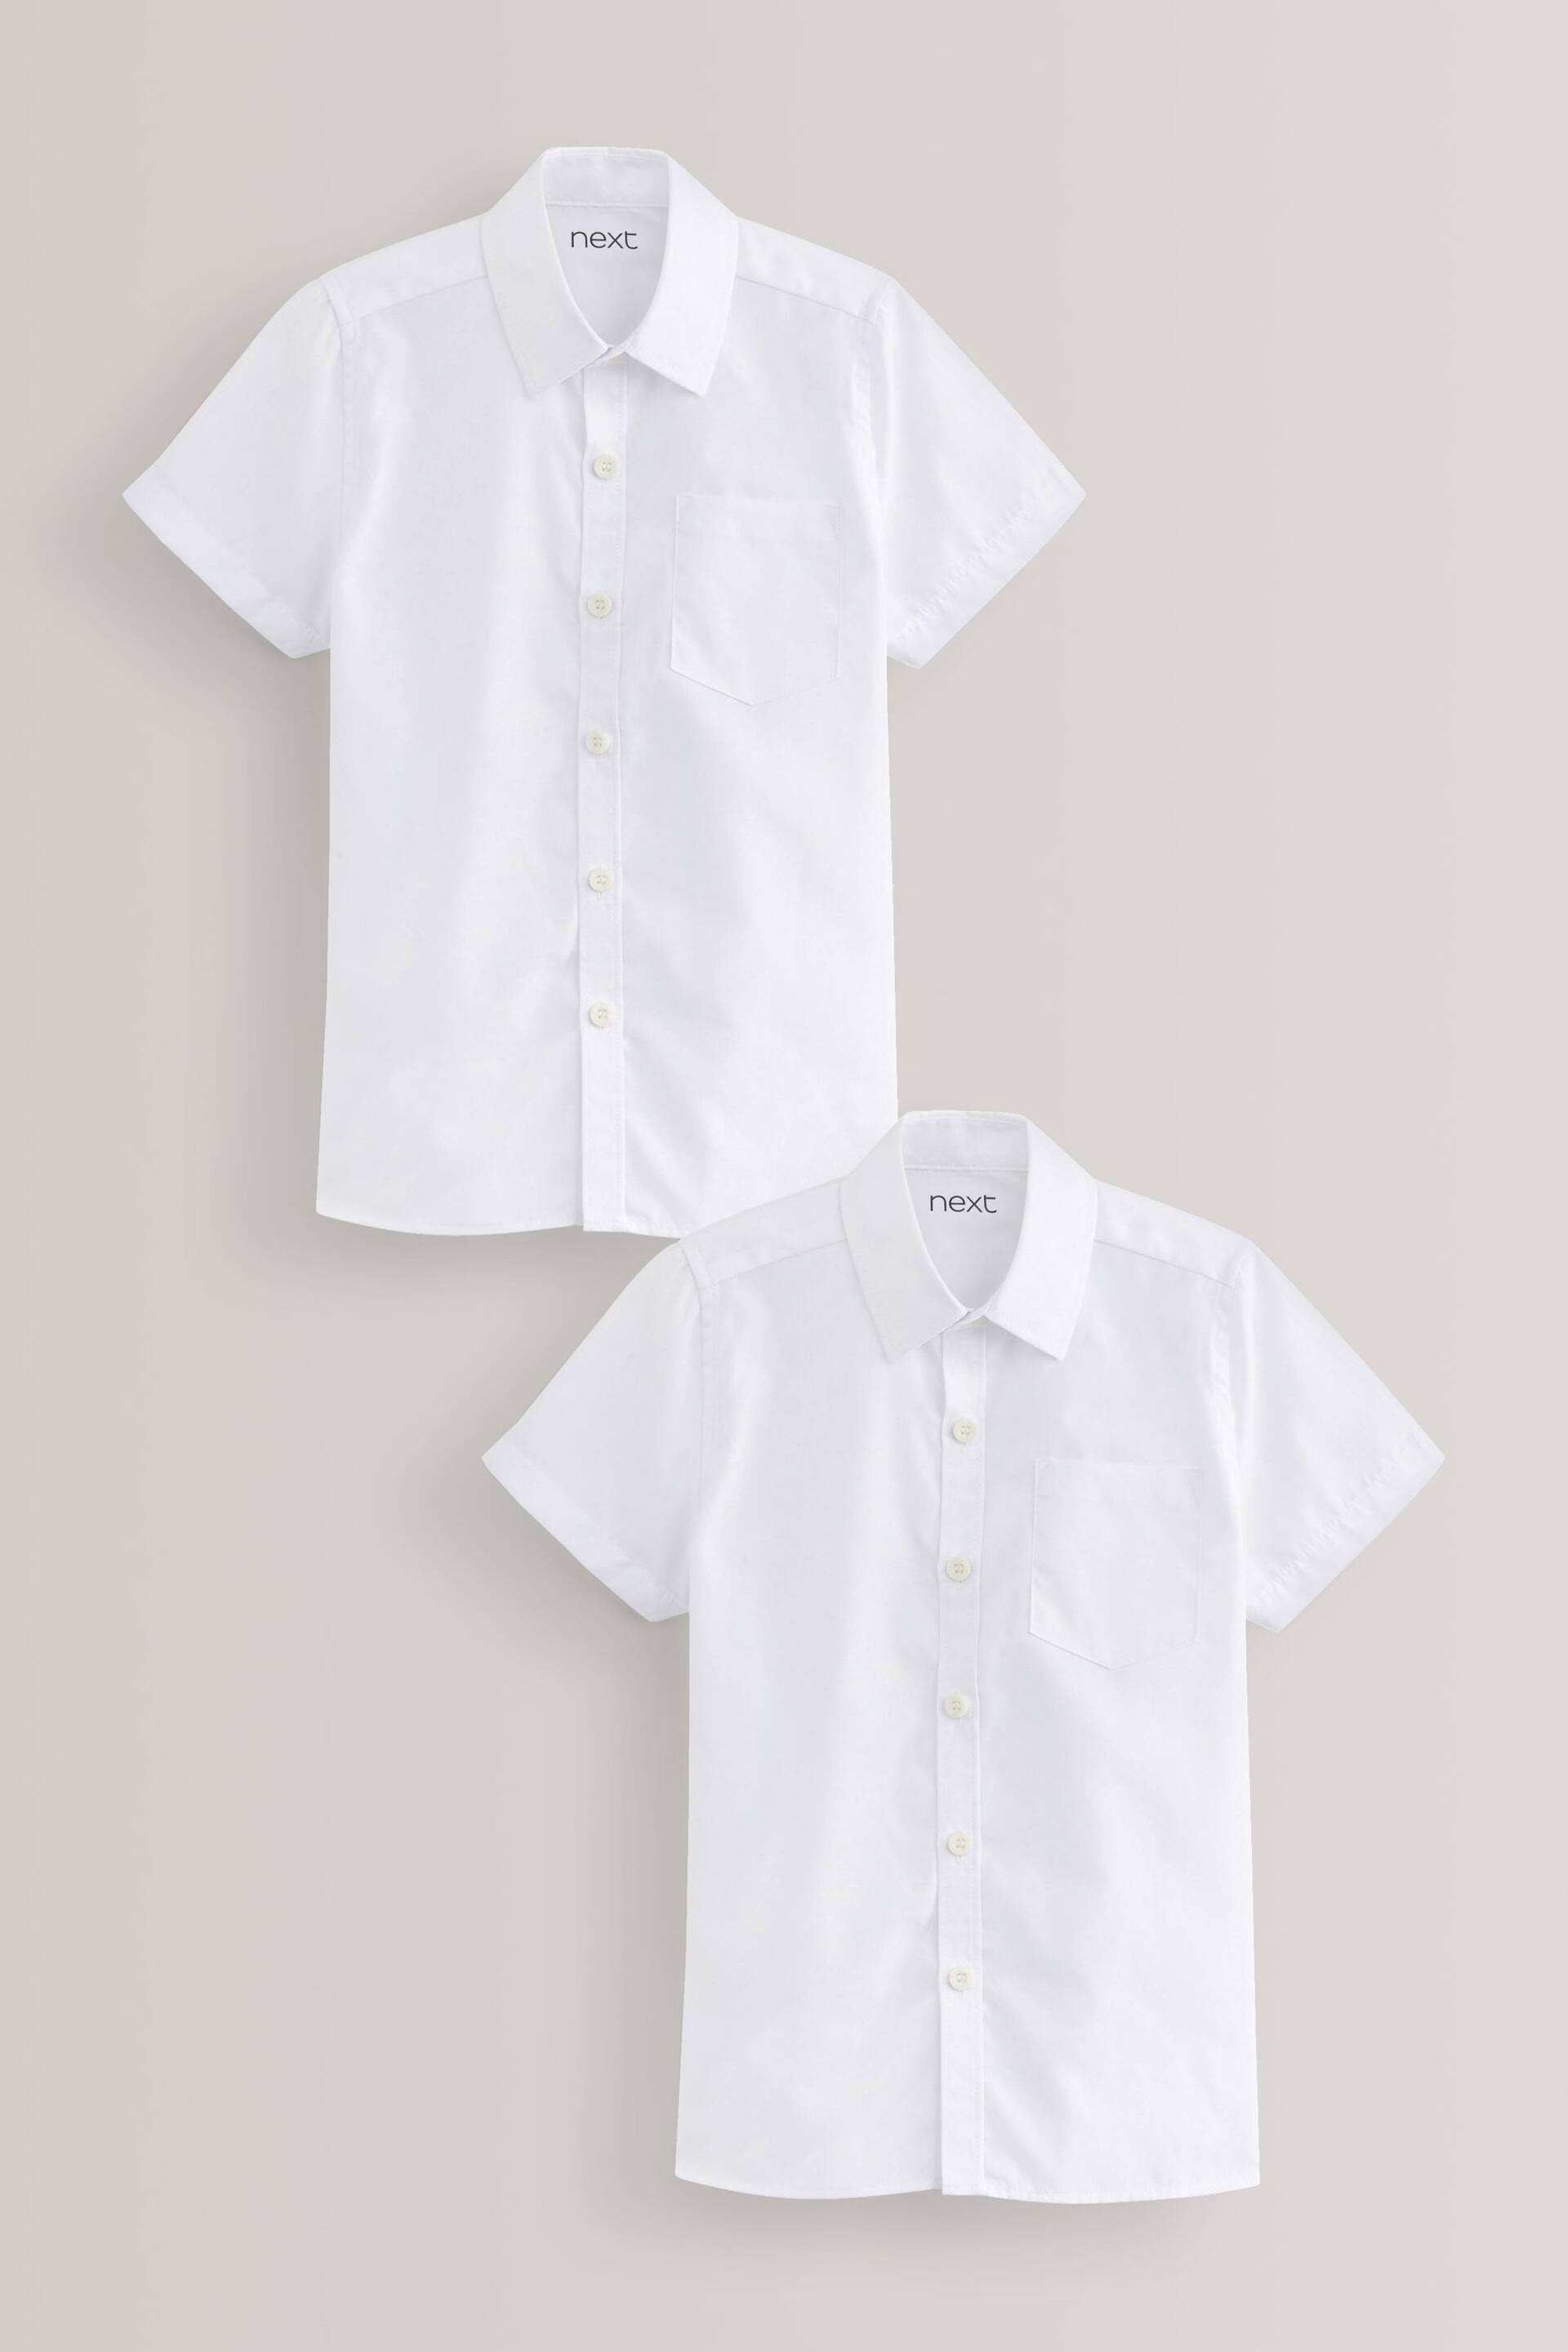 White Slim Fit 2 Pack Short Sleeve School Shirts (3-17yrs) - Image 1 of 6